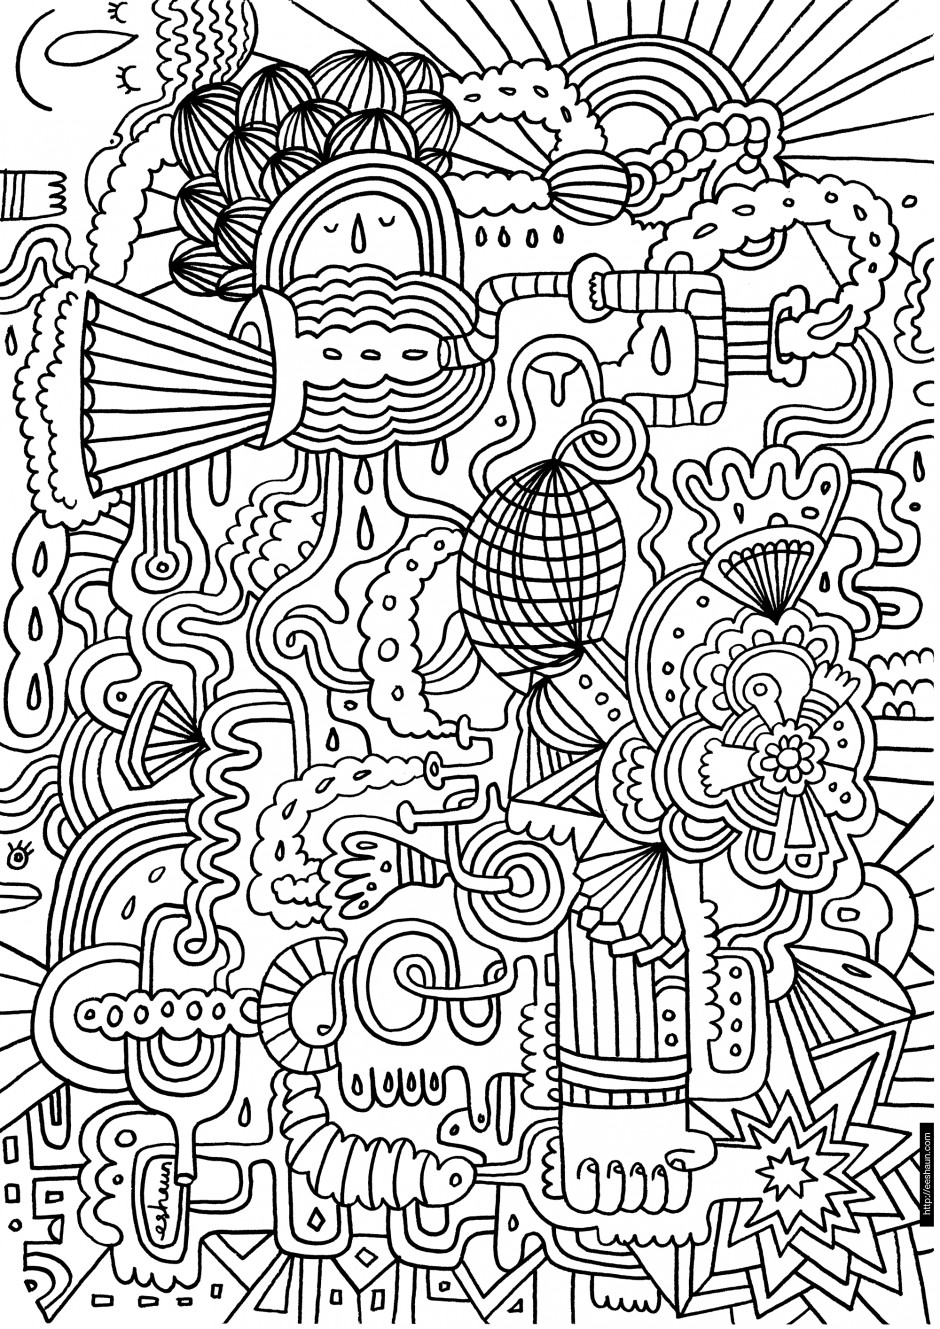 Funny Adult Coloring Pages
 Coloring Pages Difficult but Fun Coloring Pages Free and